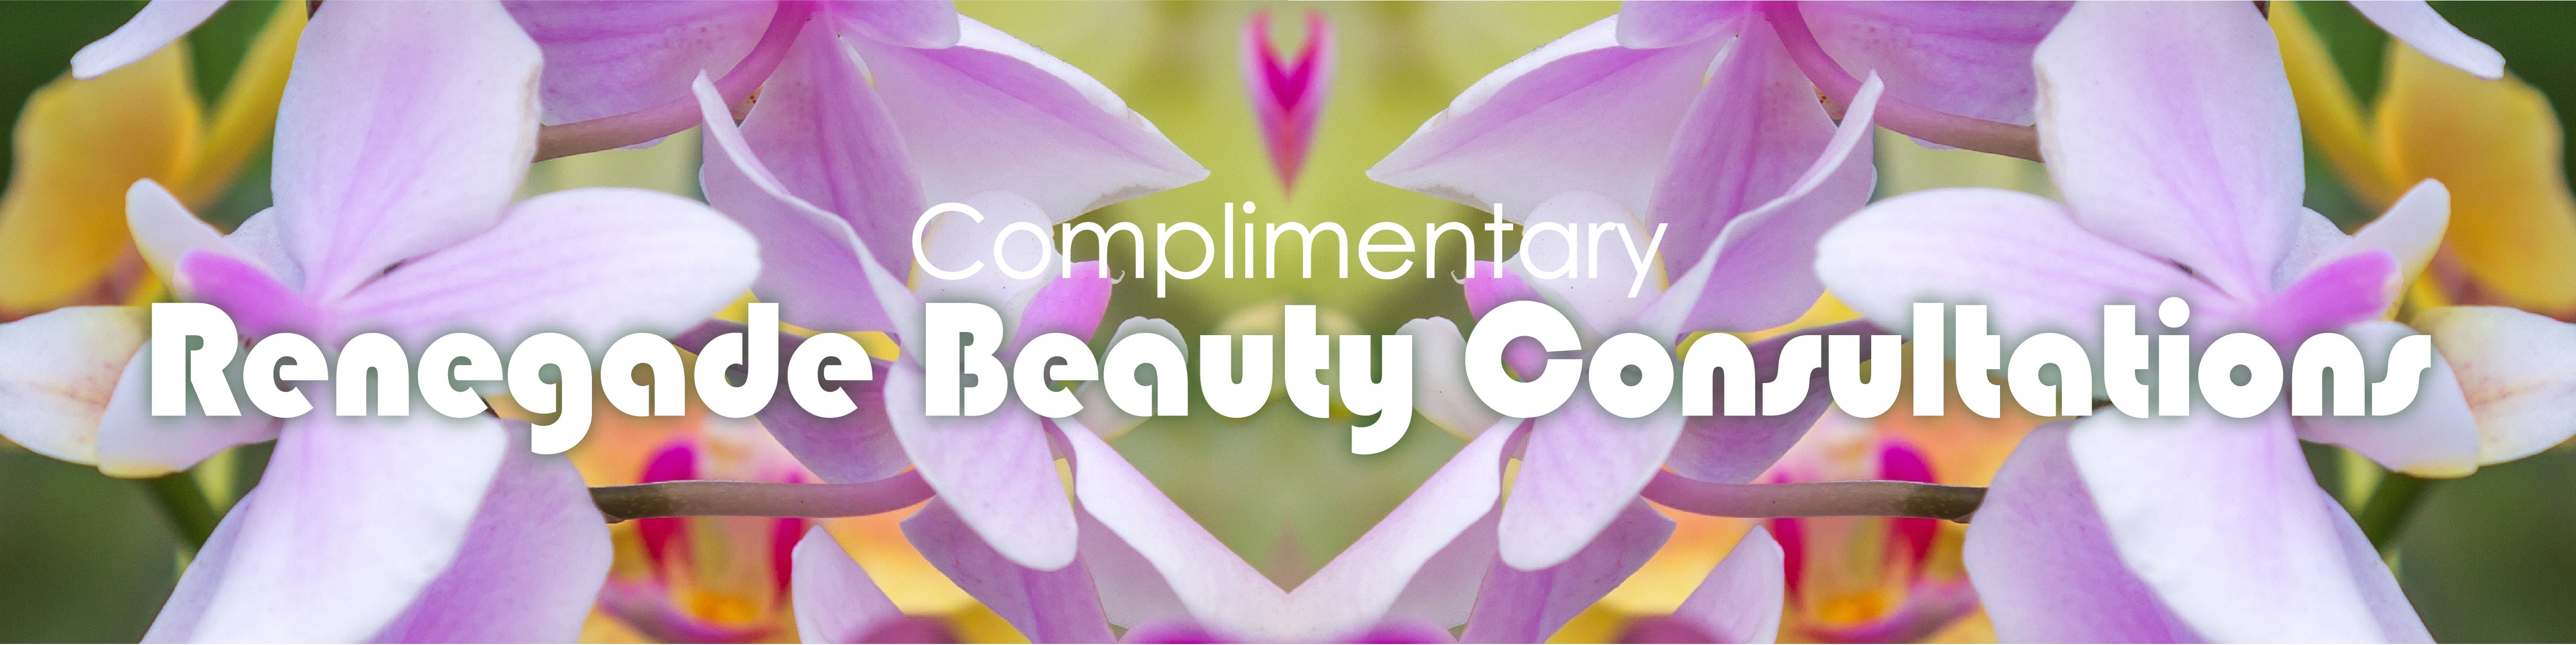 Renegade Beauty Consultations